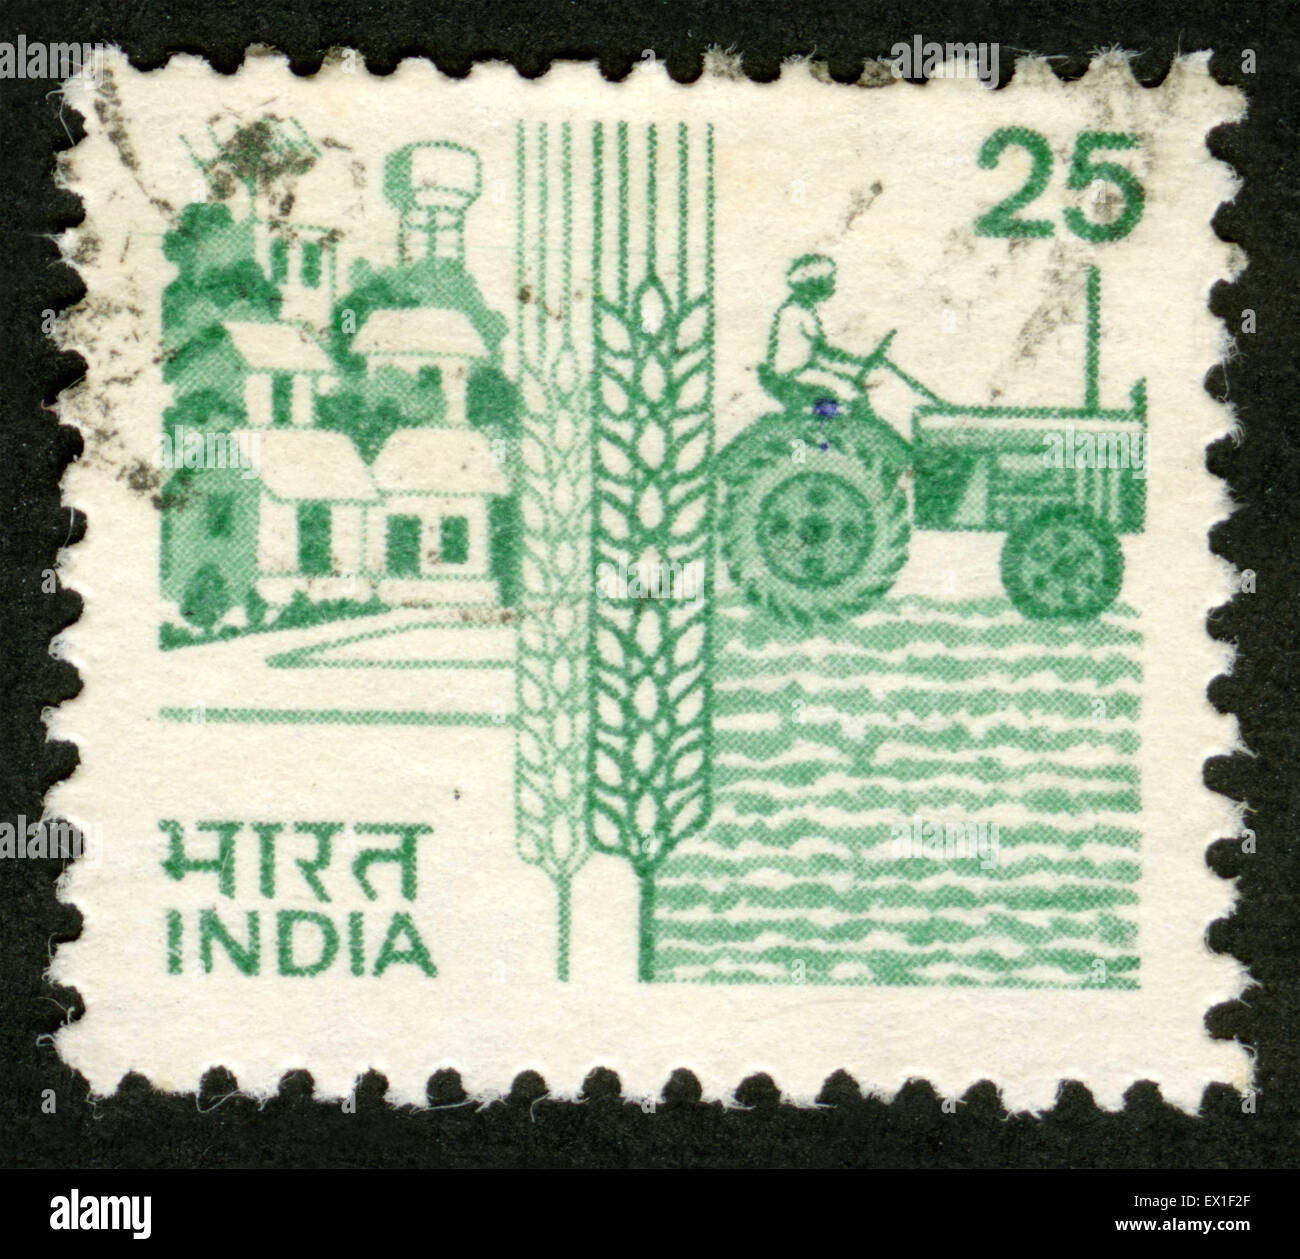 India, Agriculture, postage, stamp, Stock Photo